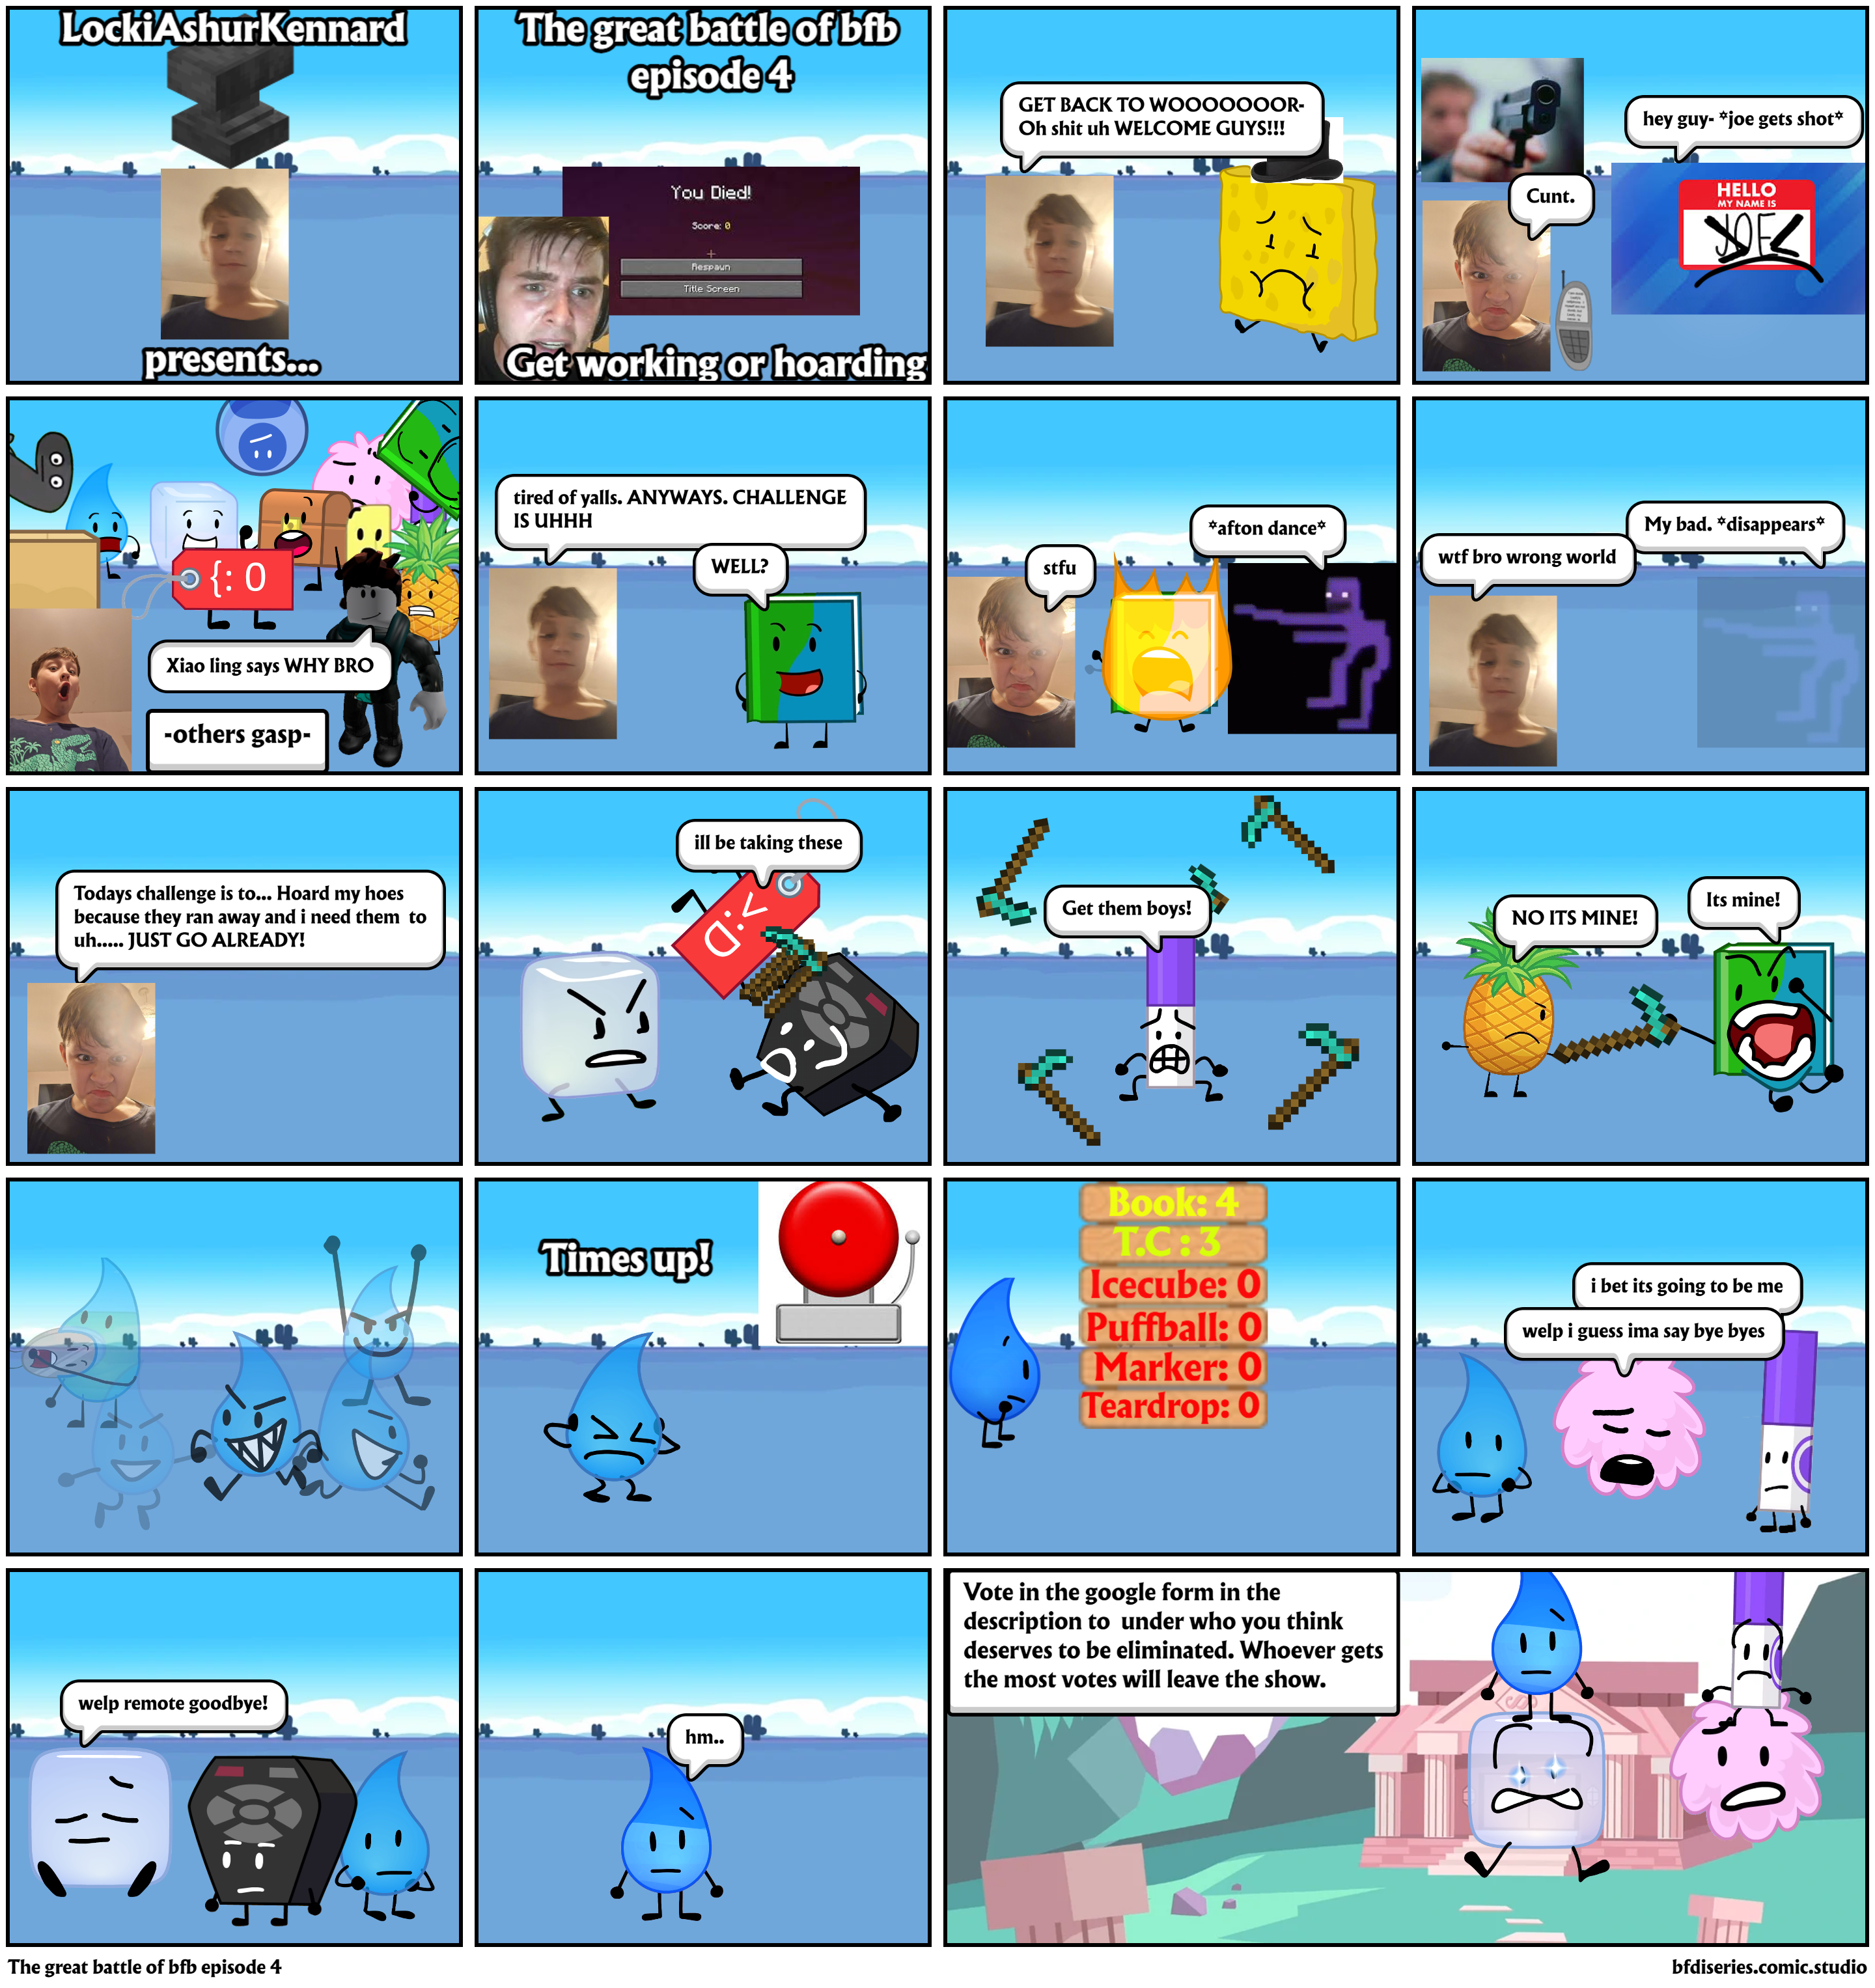 The great battle of bfb episode 4